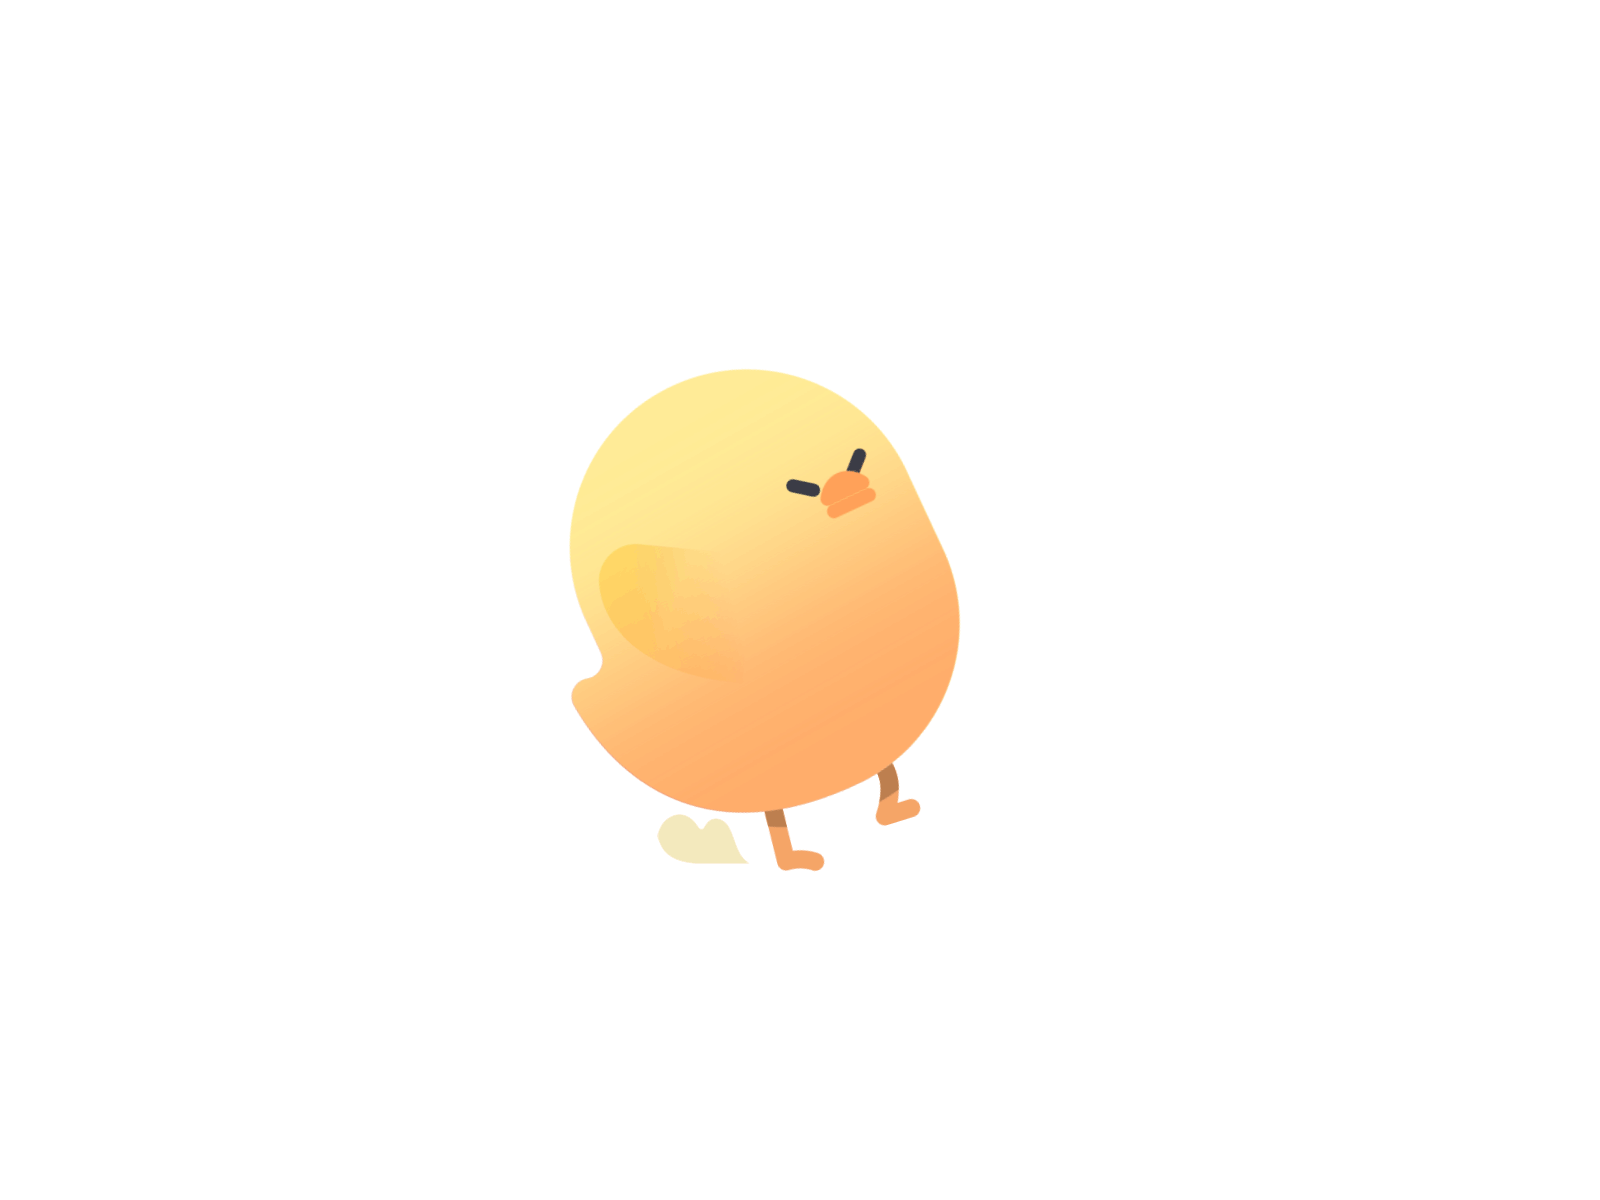 CHEEP-Hurt 2d animation animation attack character chick design game hurt illustration sprite sheet